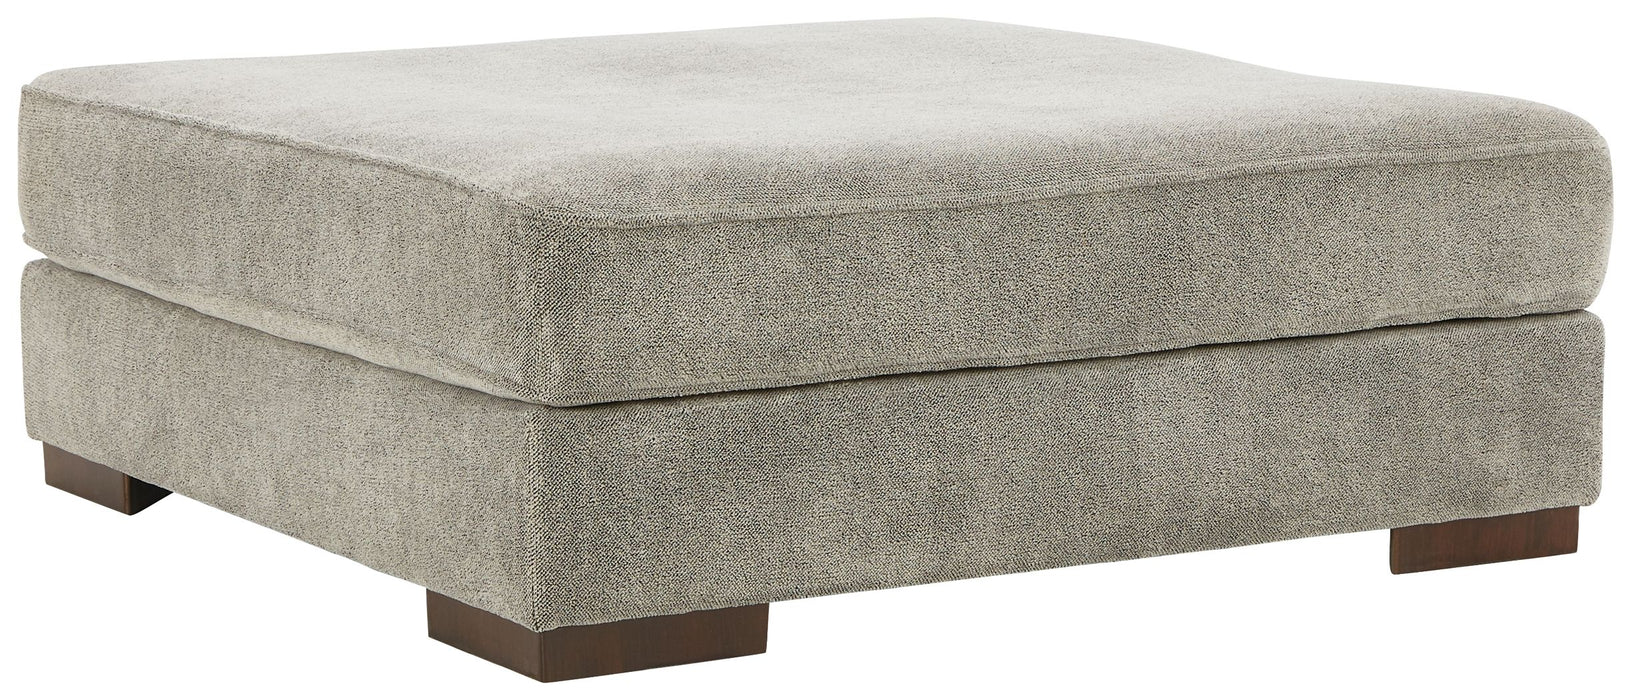 Bayless - Smoke - Oversized Accent Ottoman Capital Discount Furniture Home Furniture, Home Decor, Furniture